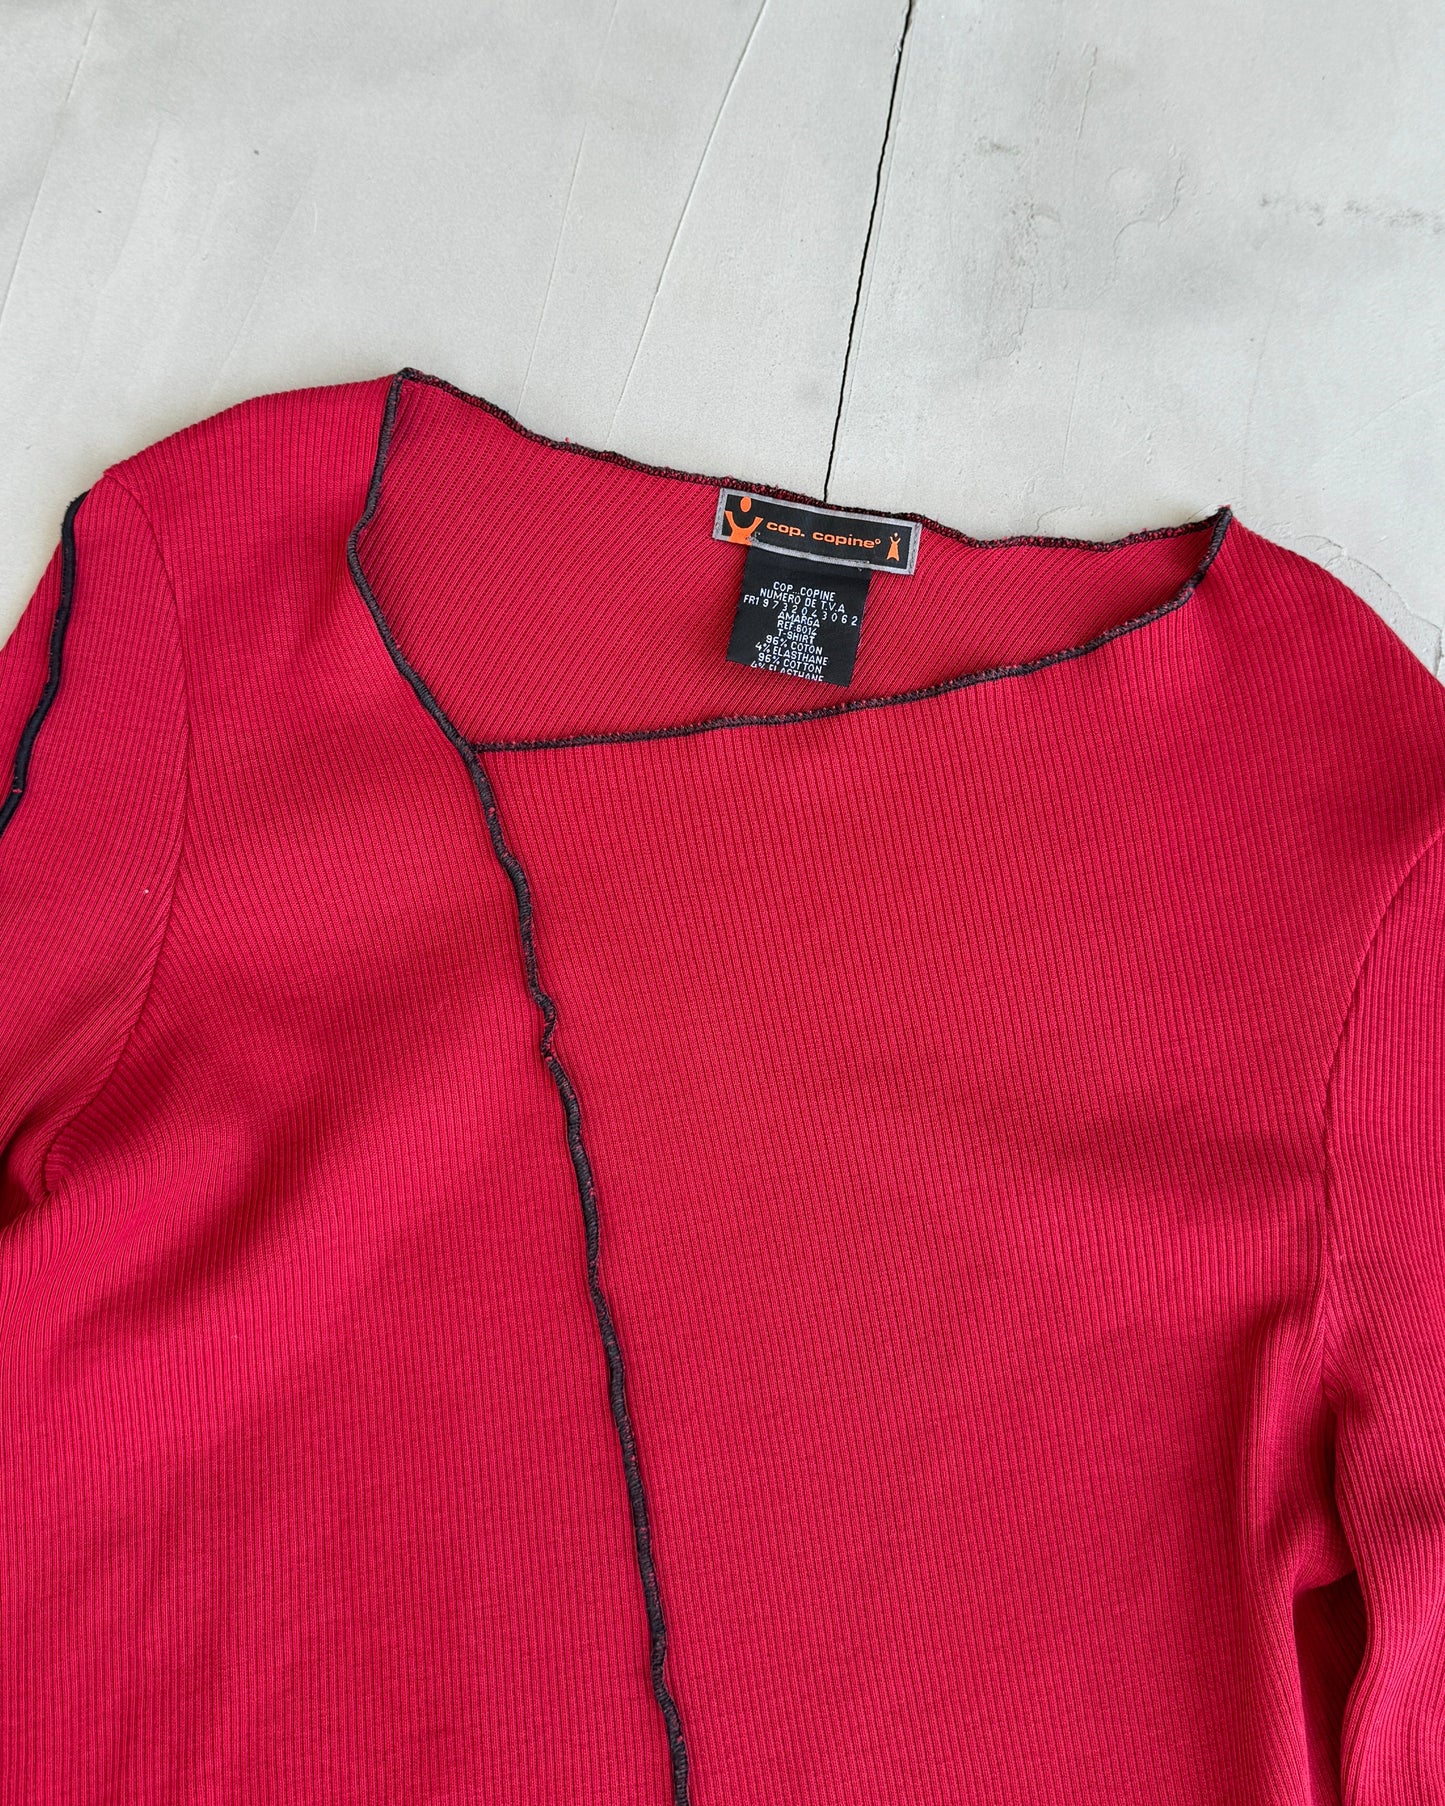 COP COPINE LONG SLEEVE RED ASYMMETRIC RIBBED TOP - M/L